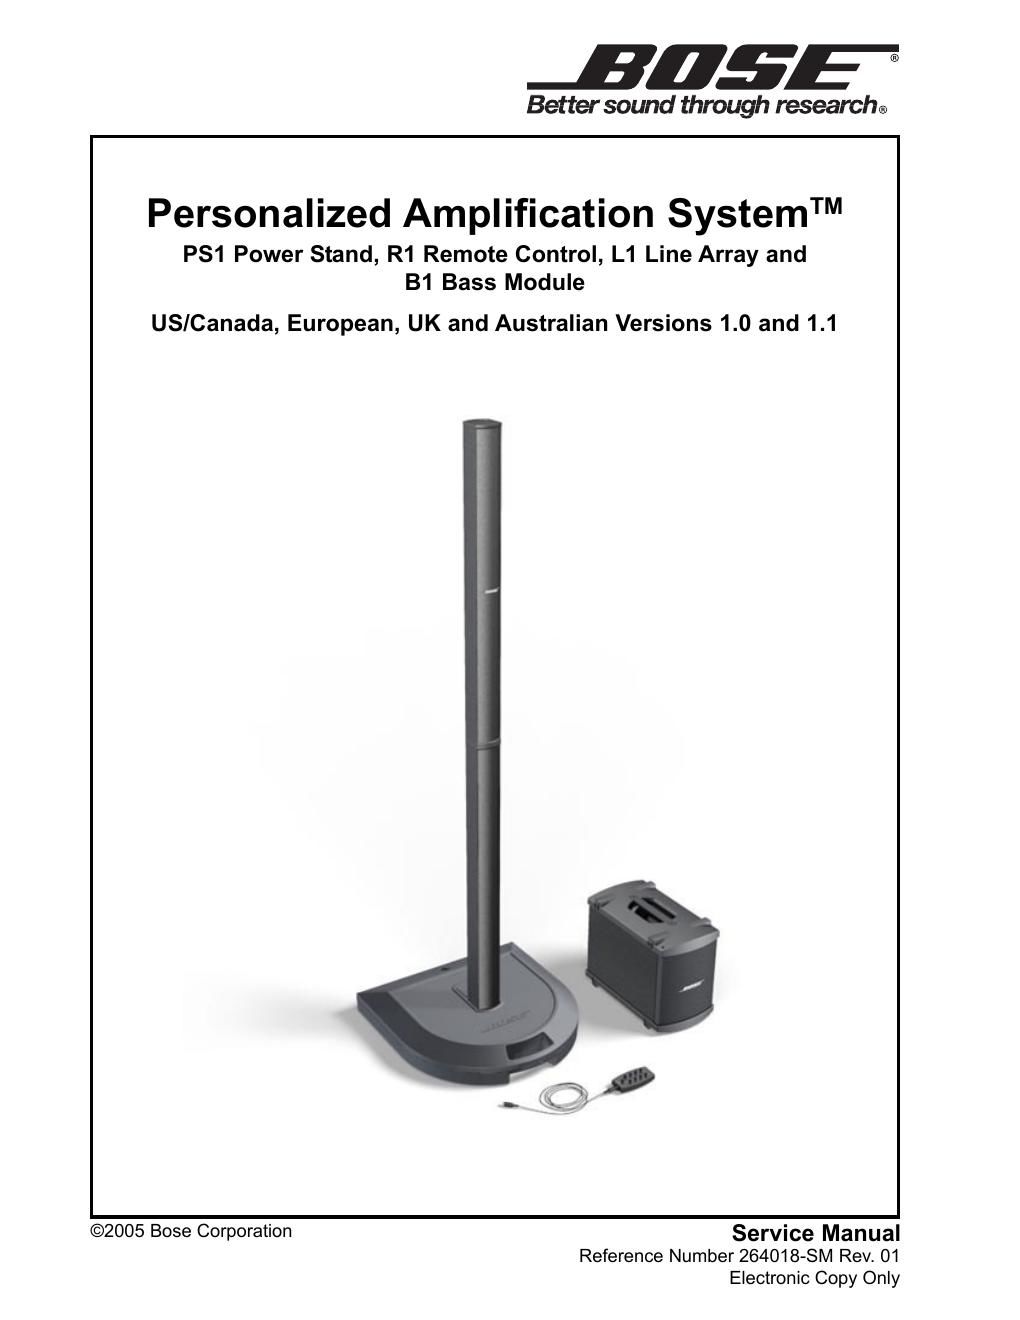 bose personalized amplification system service manual rev 01